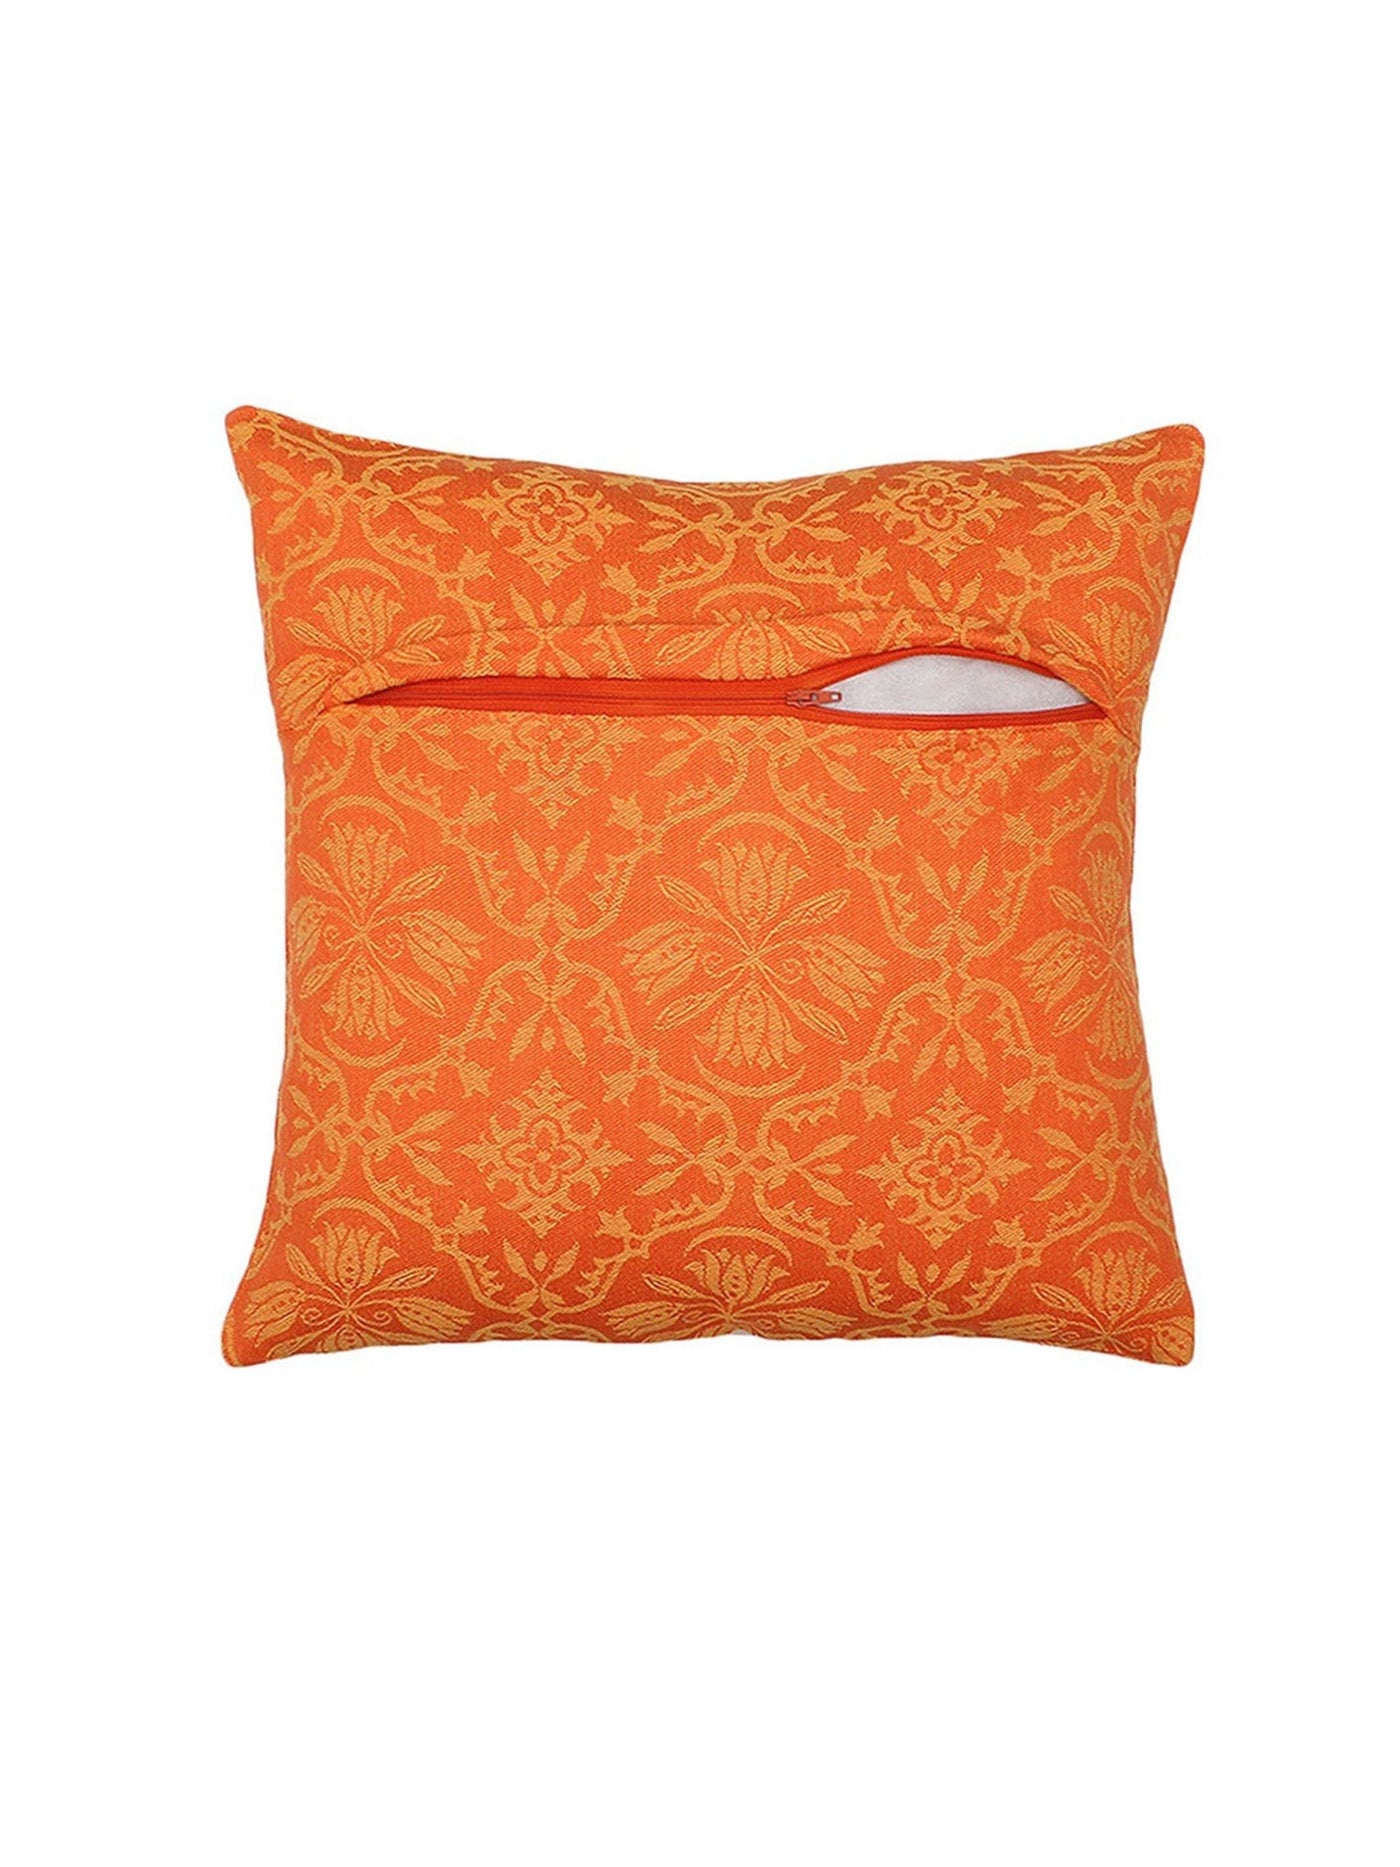 Cushion Cover - Finished Goods-Living-2 s-8903773000913